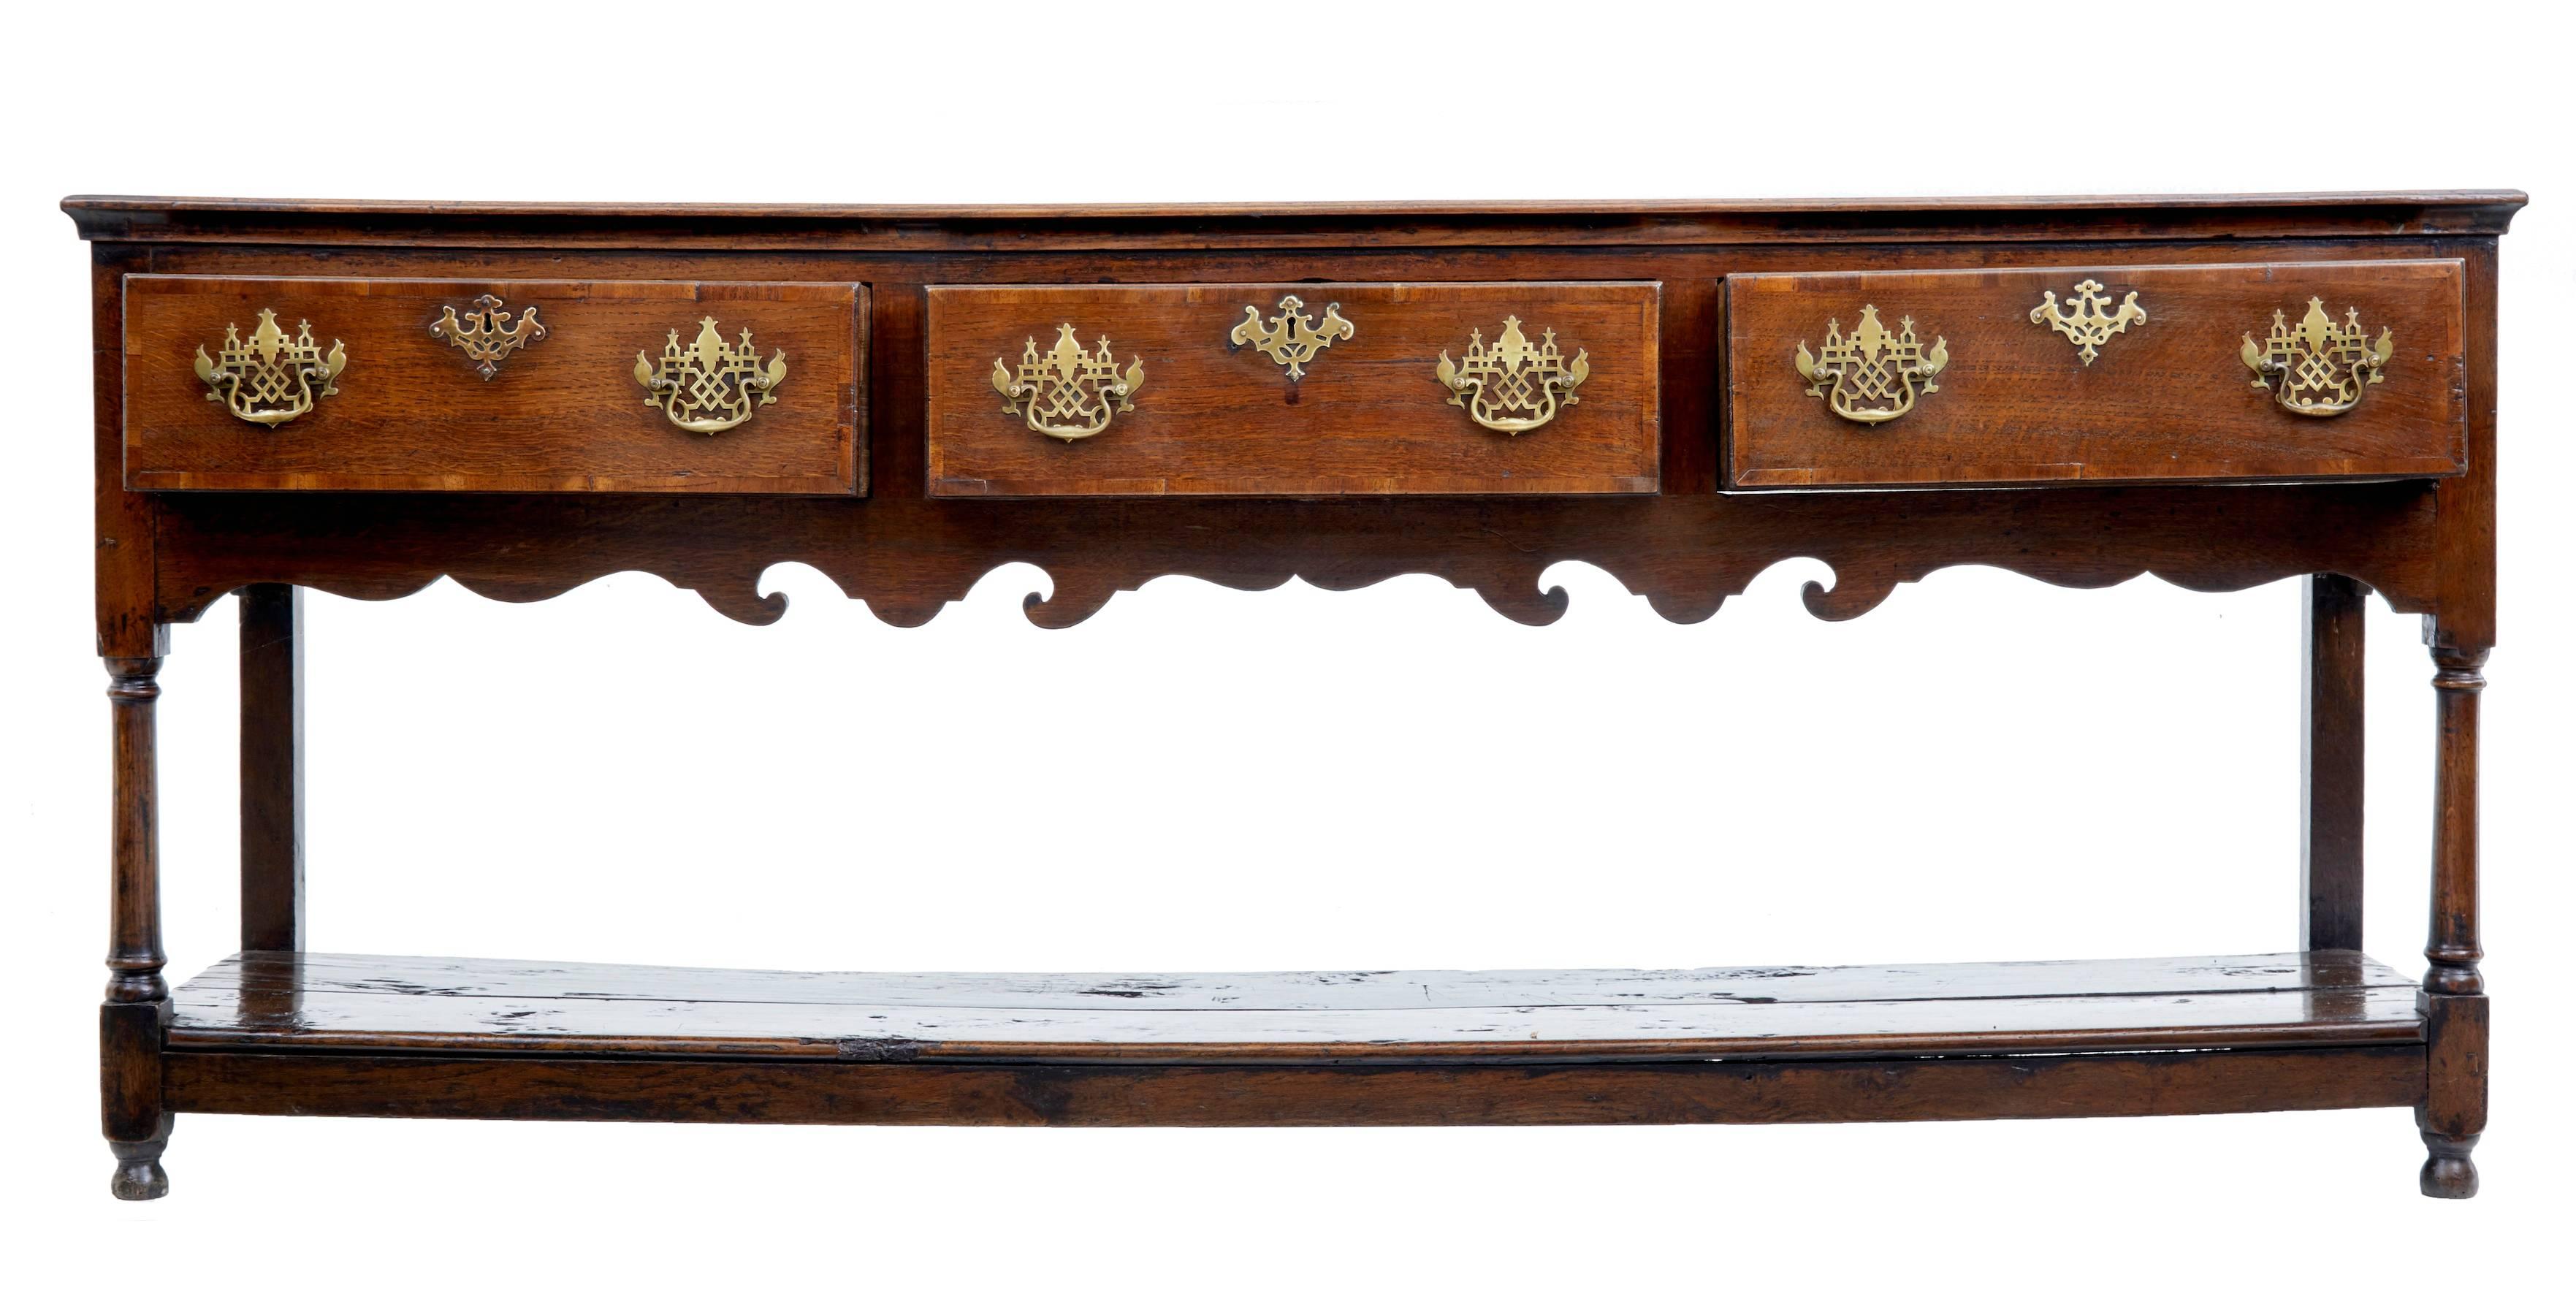 A very pretty 18th century oak dresser base, circa 1750.
Crossbanded with mahogany on the top and drawer fronts.
Pierced brass handles.
Standing on turned front legs, supporting a two plank pot board shelf.
Very good color and